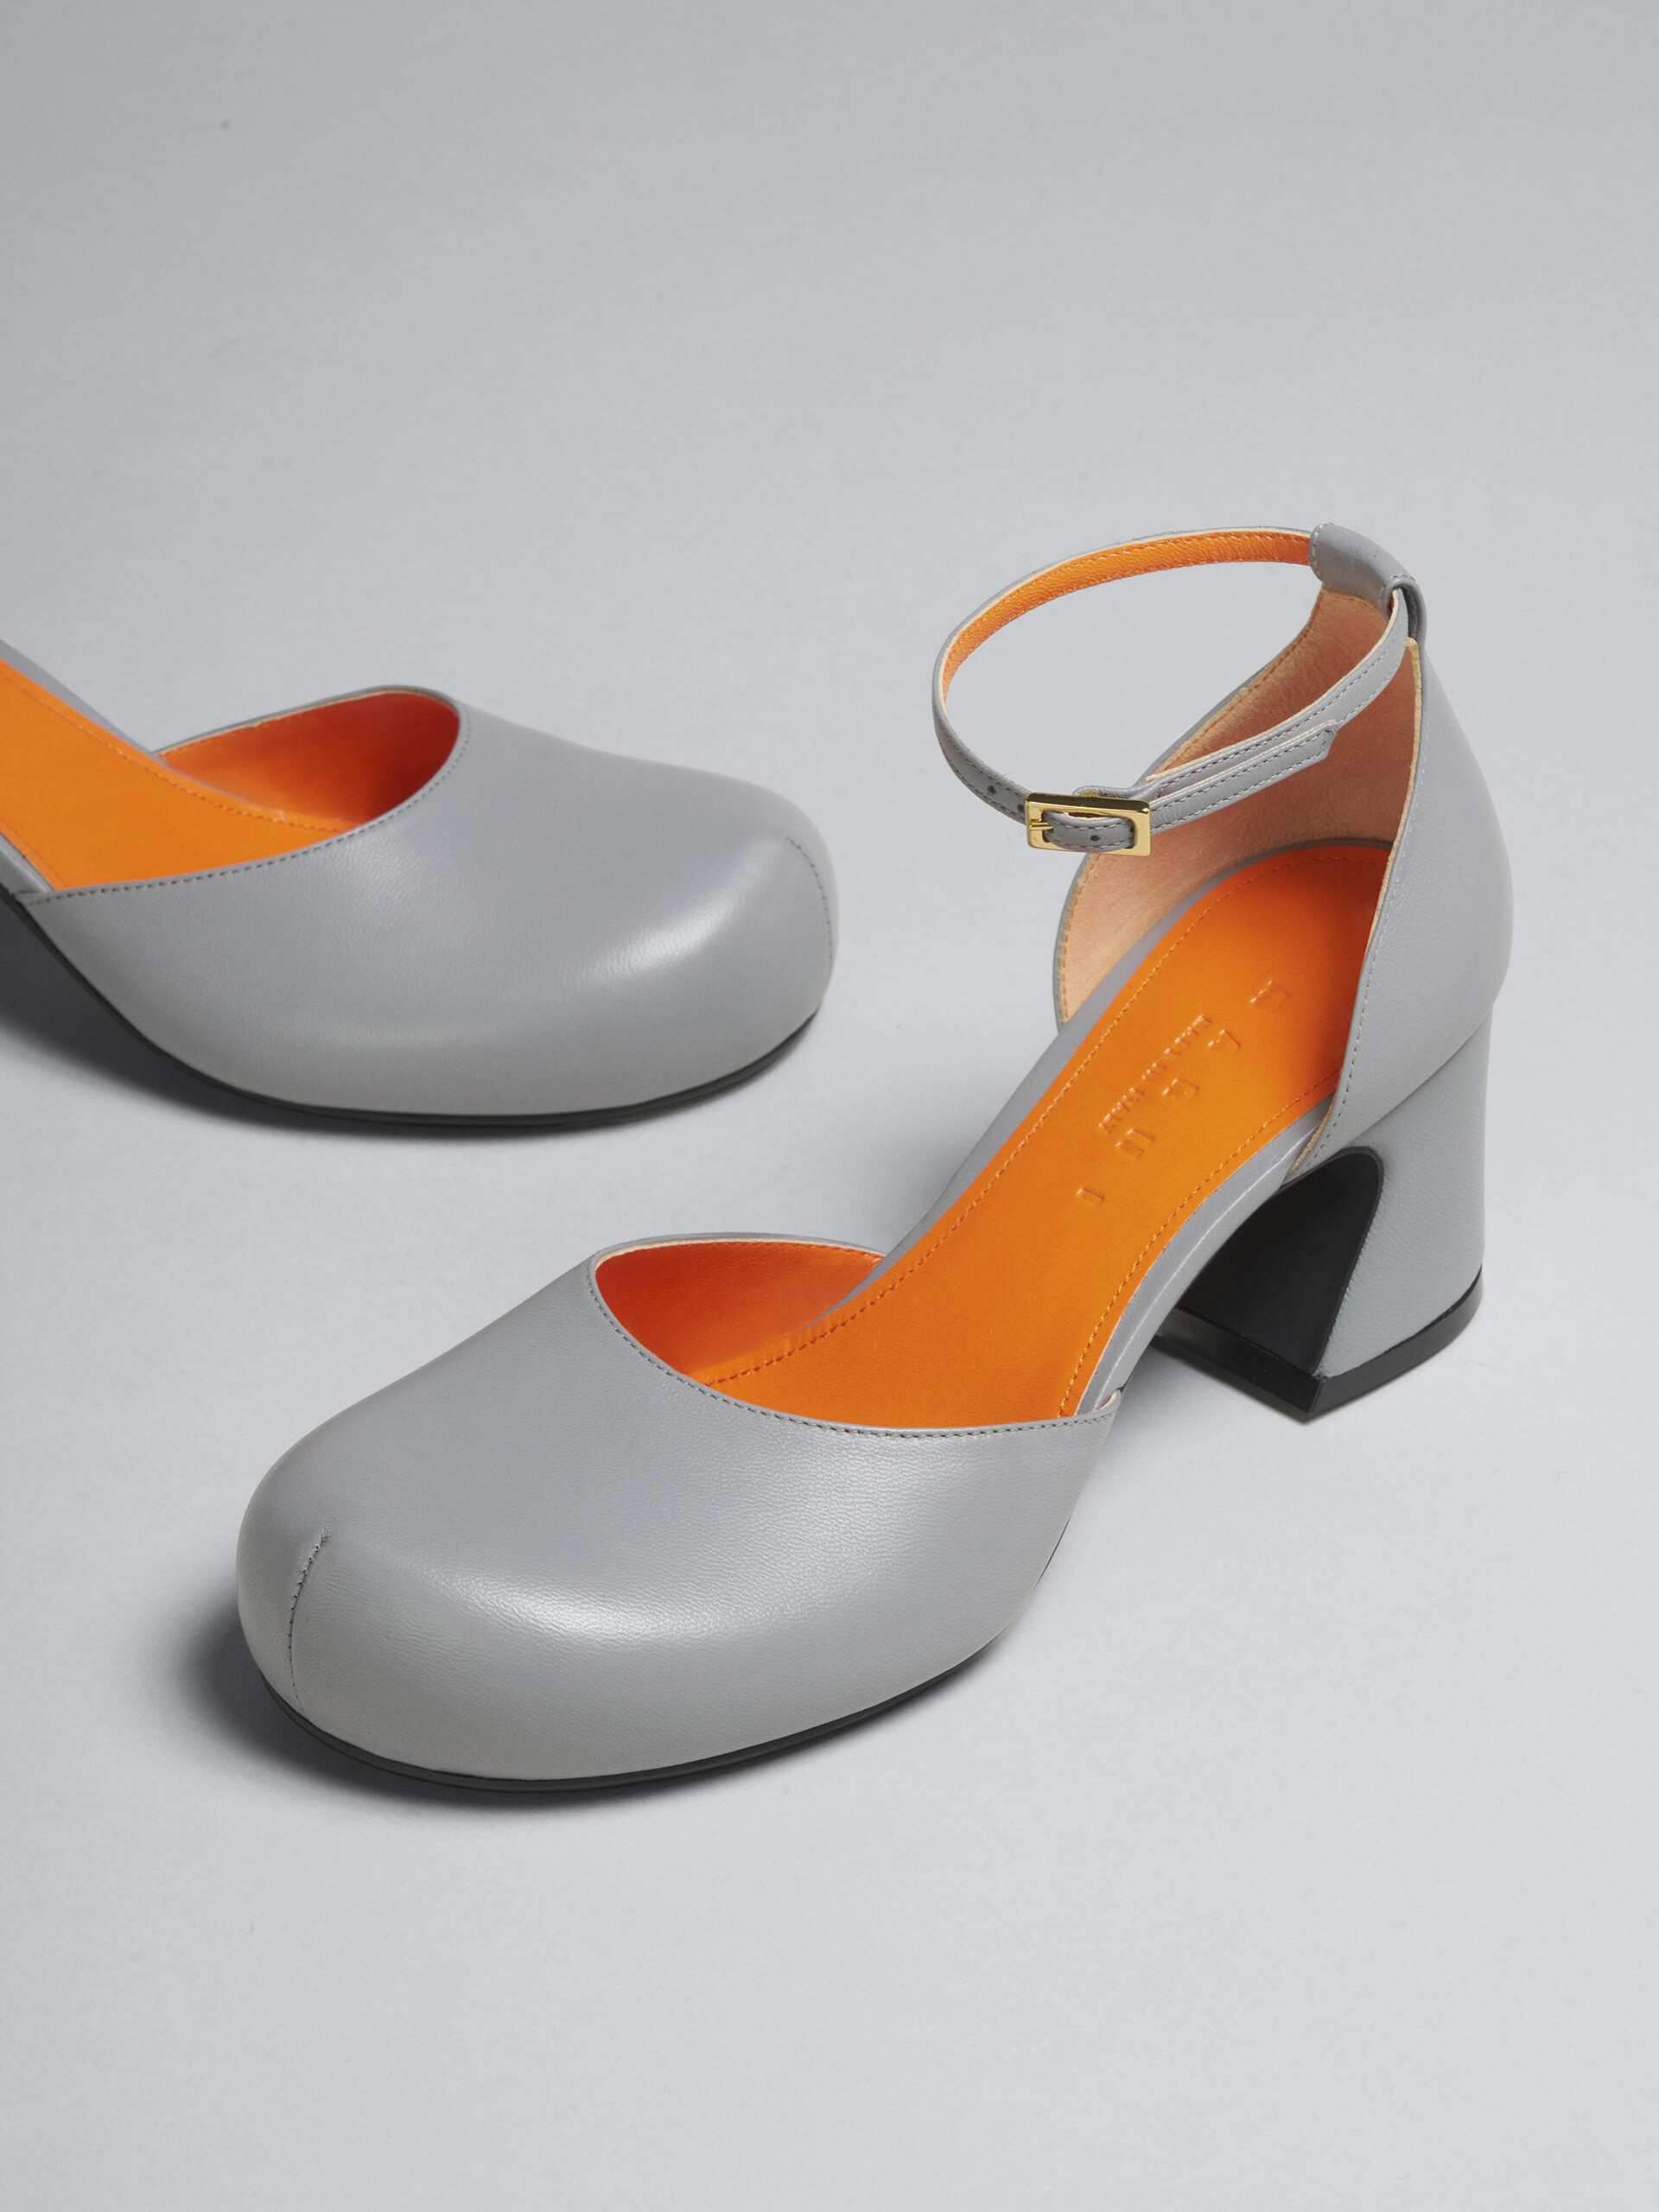 Grey leather Mary Jane pump - Pumps - Image 5